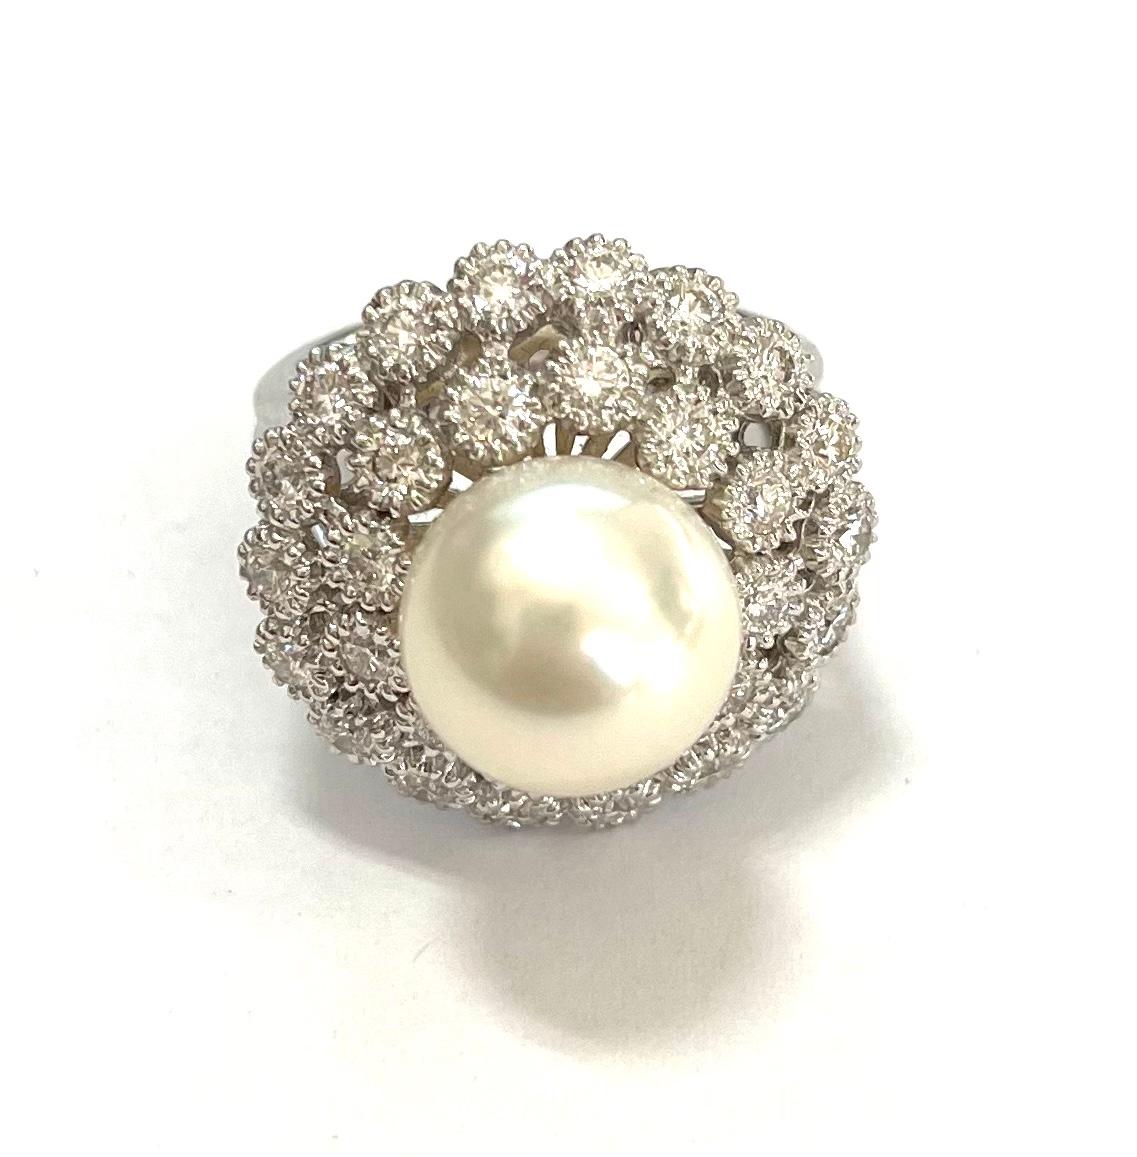 18k white gold ring with pearl and diamonds
Stamp 750 10 MI
pearl diameter 11 mm
diamonds ct 1.50
gold weight 13.90 g
US SIZE 7
the full set is available